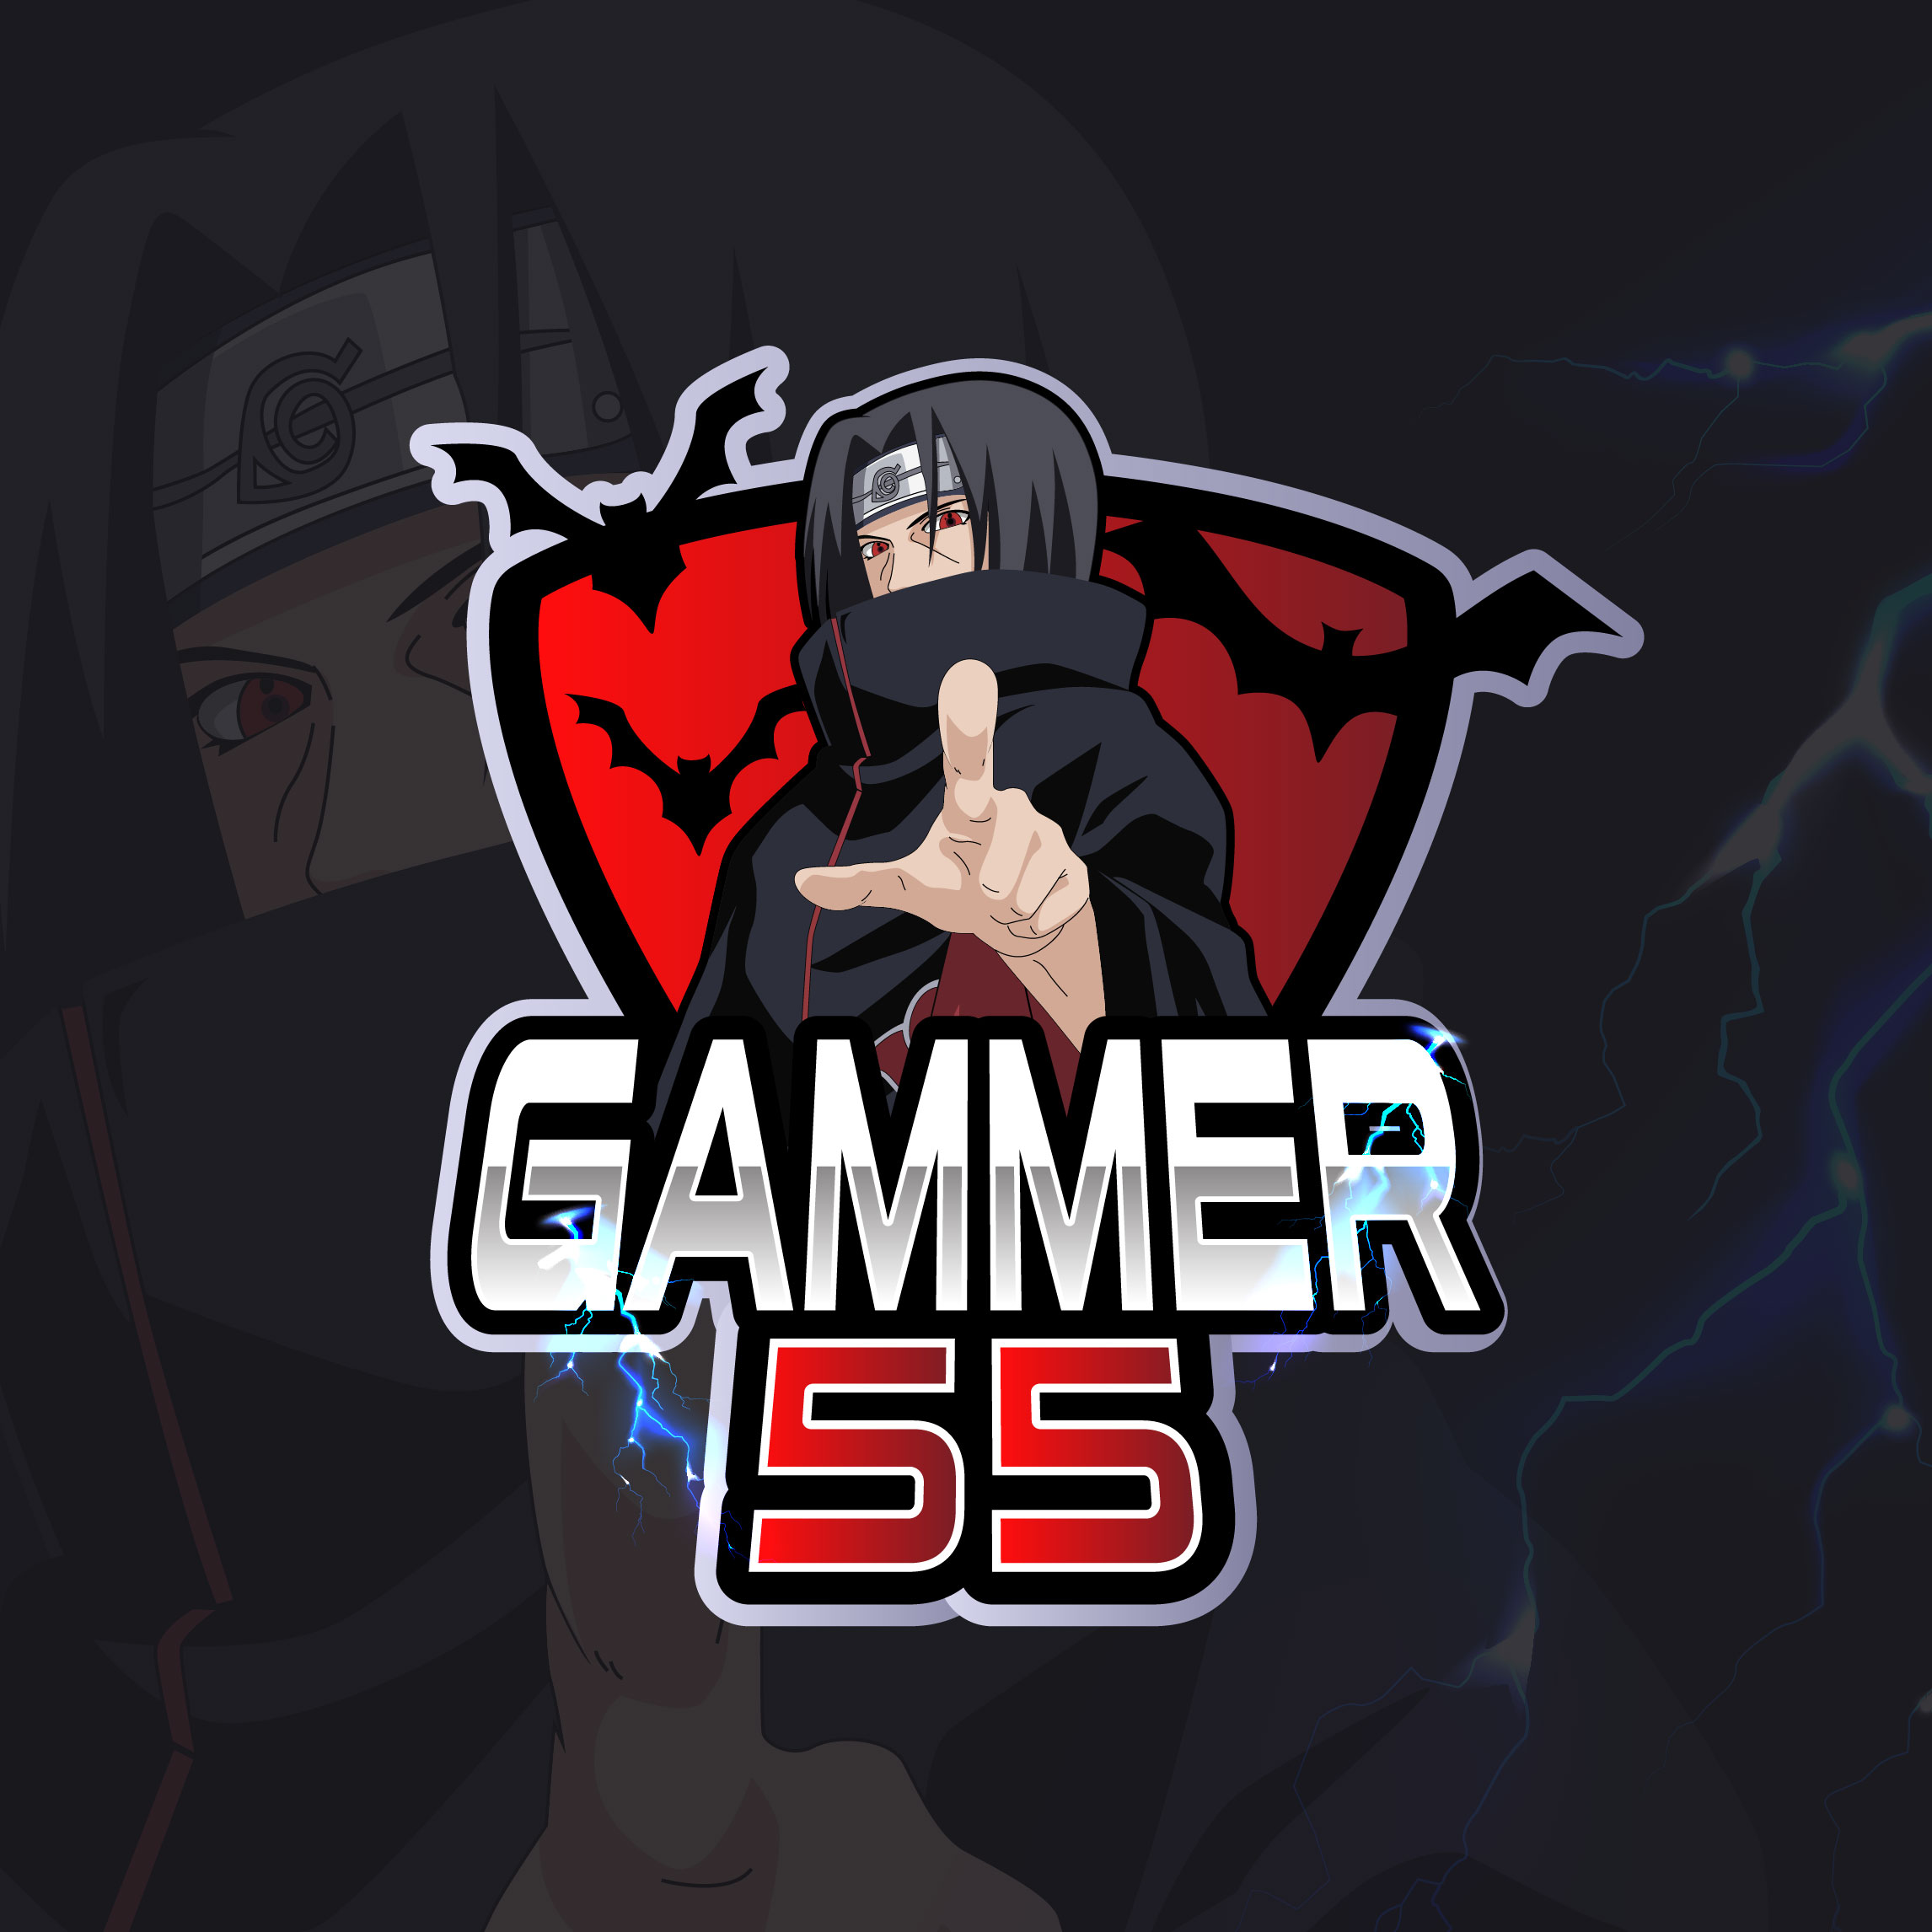 Gaming clan community logo for video games and anime  Logo design contest   99designs